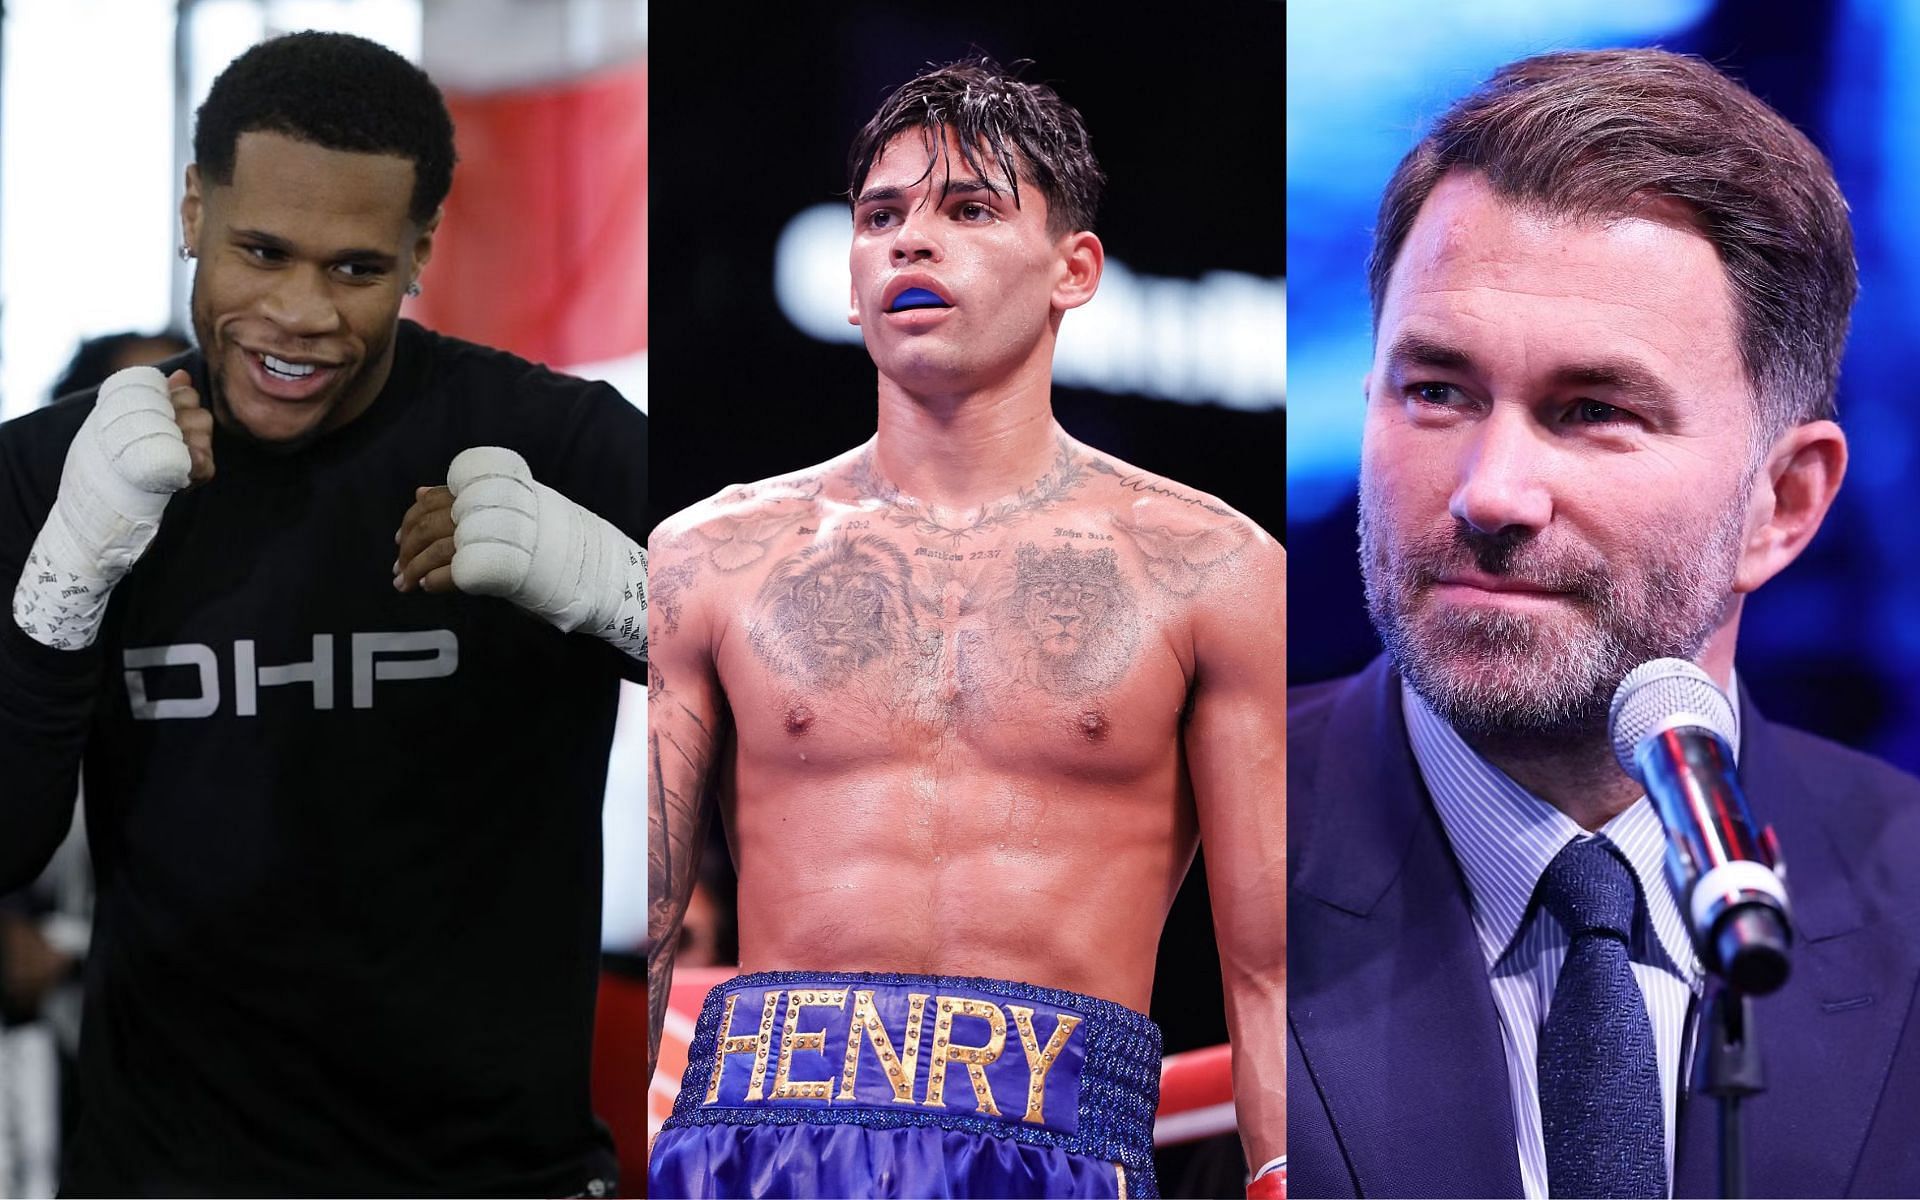 Eddie Hearn (right) believes Ryan Garcia (middle) could benefit from his pre-fight antics against Devin Haney (left) [Images Courtesy: @GettyImages]